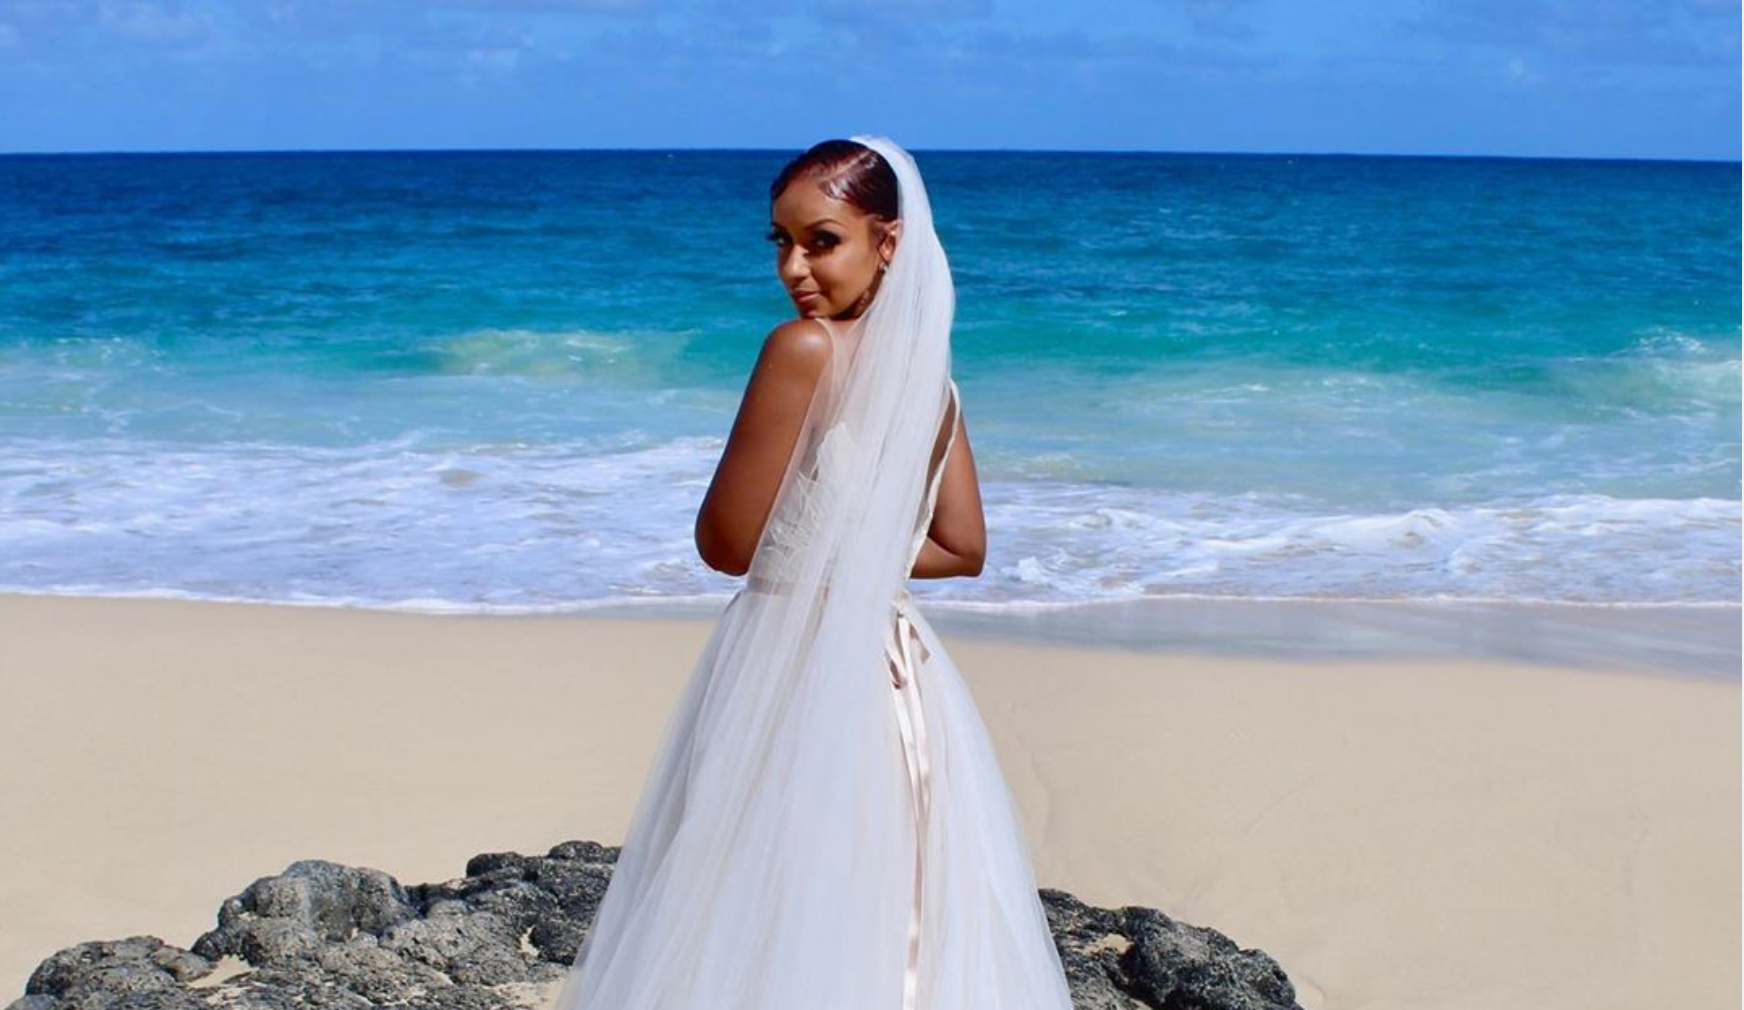 Singer Mýa Confirms She’s A Married Woman